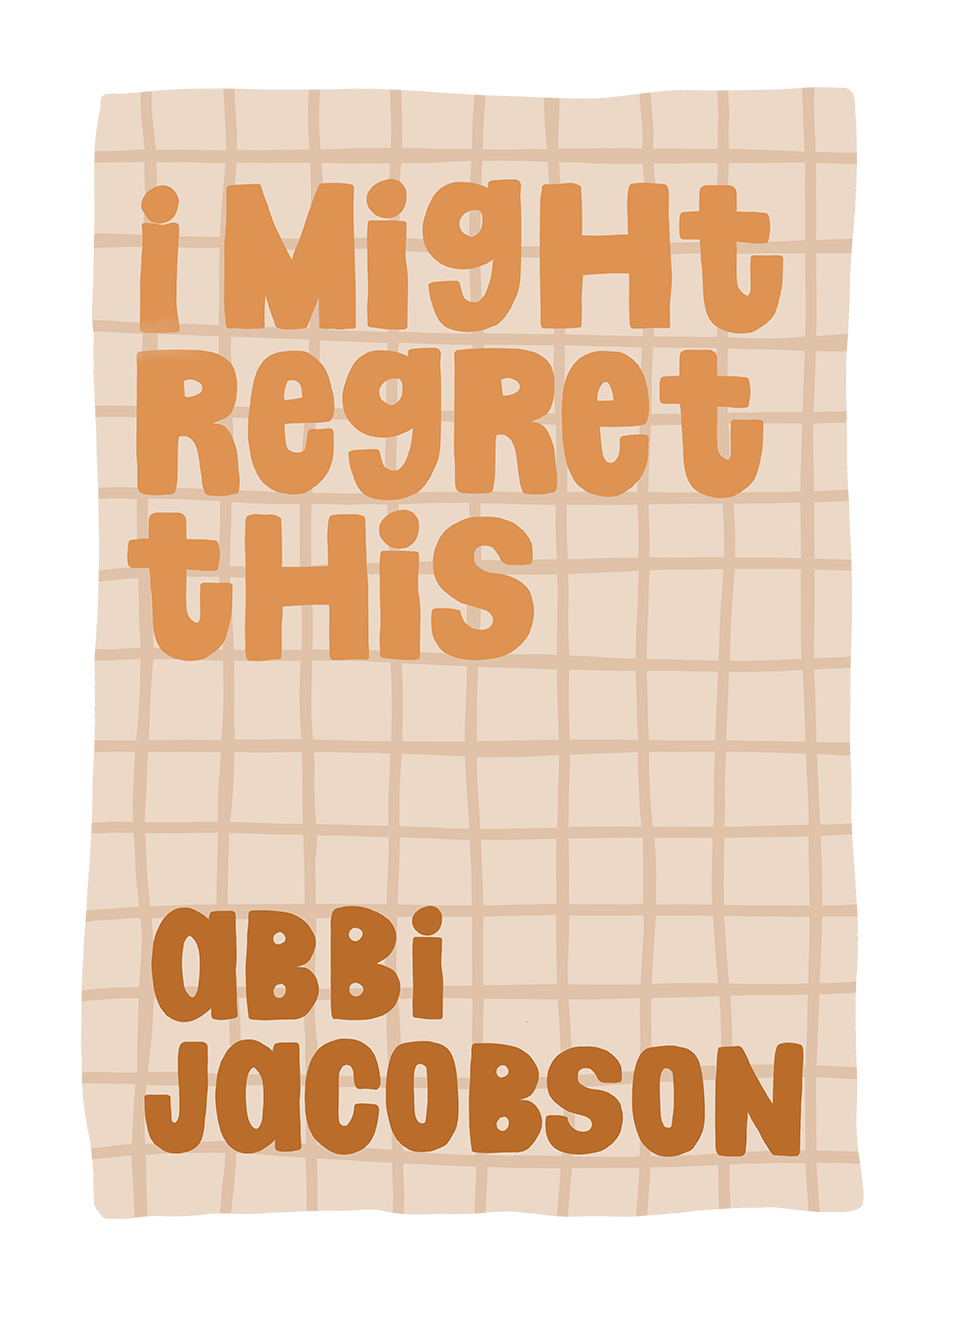 I Might Regret This by Abbi Jacobson  | illustrated by Alicia Carvalho